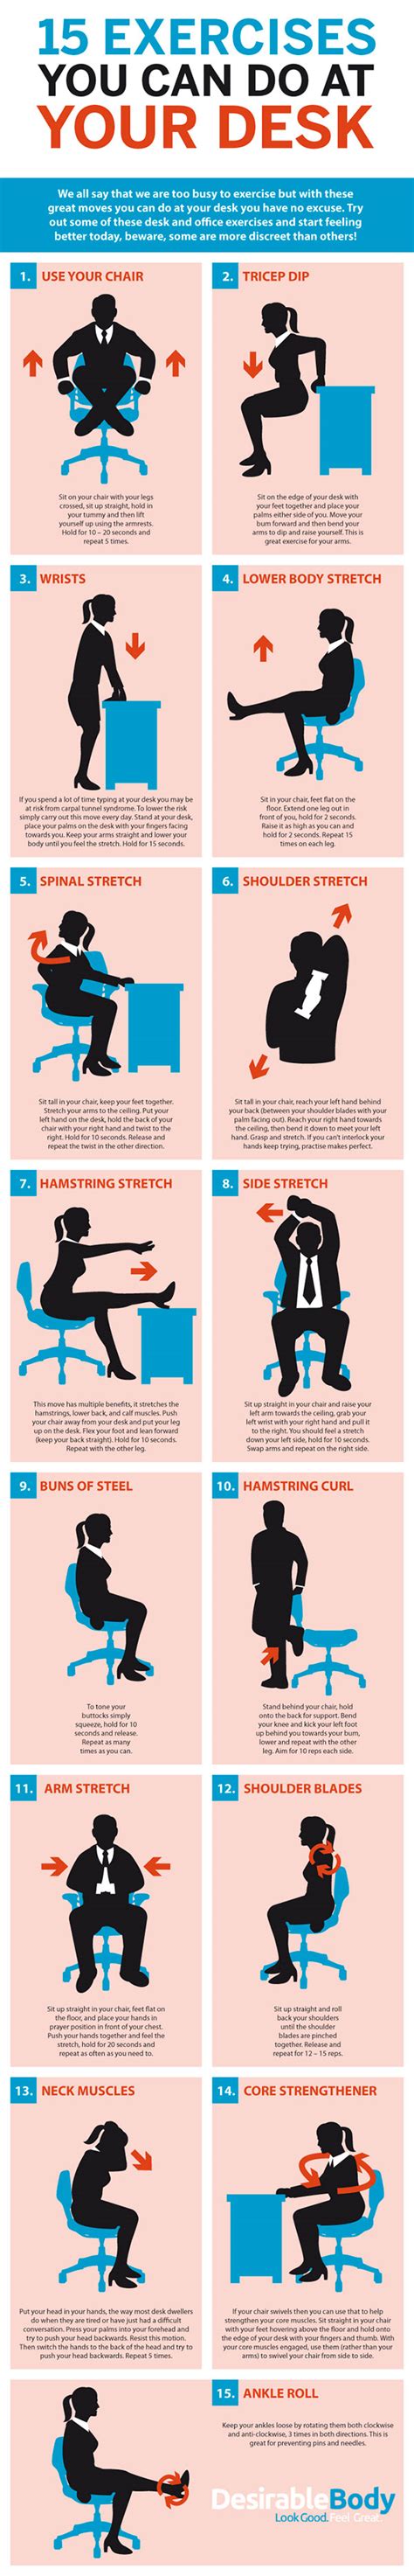 Deskercise 15 Simple Exercises You Can Do At Your Desk Diy Genius